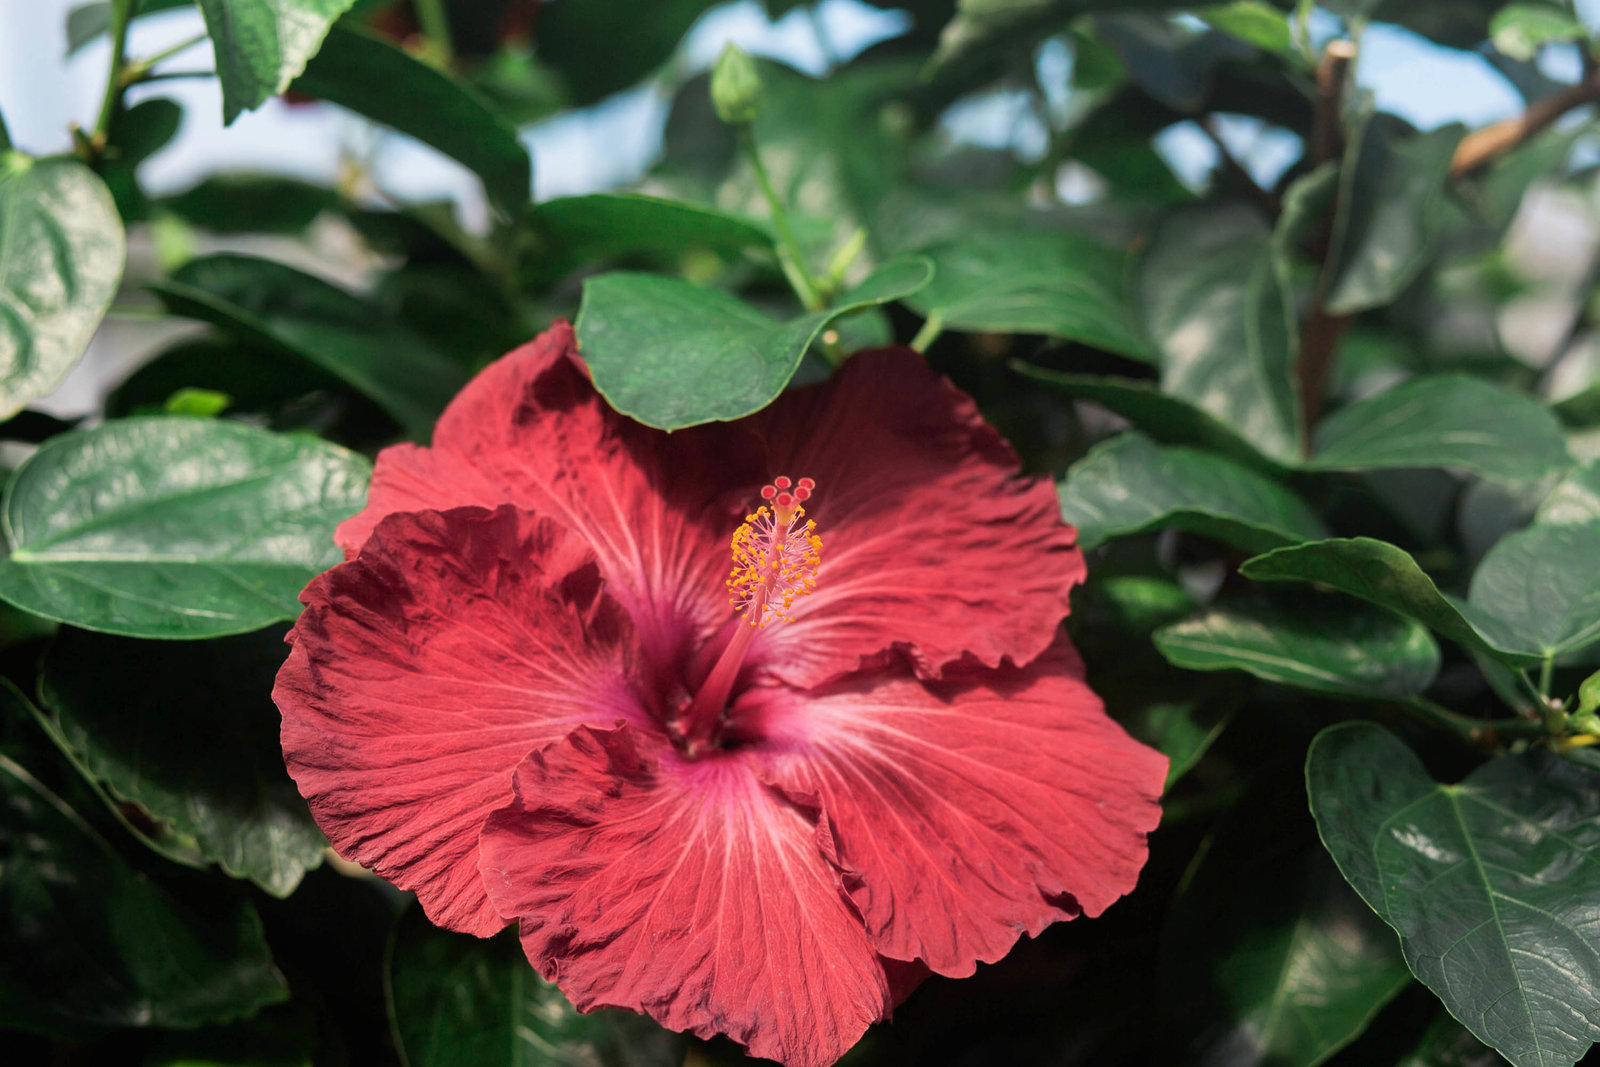 red-hibiscus-flower-garden-pennsylvania-nature-kate-timbers-photography-1365